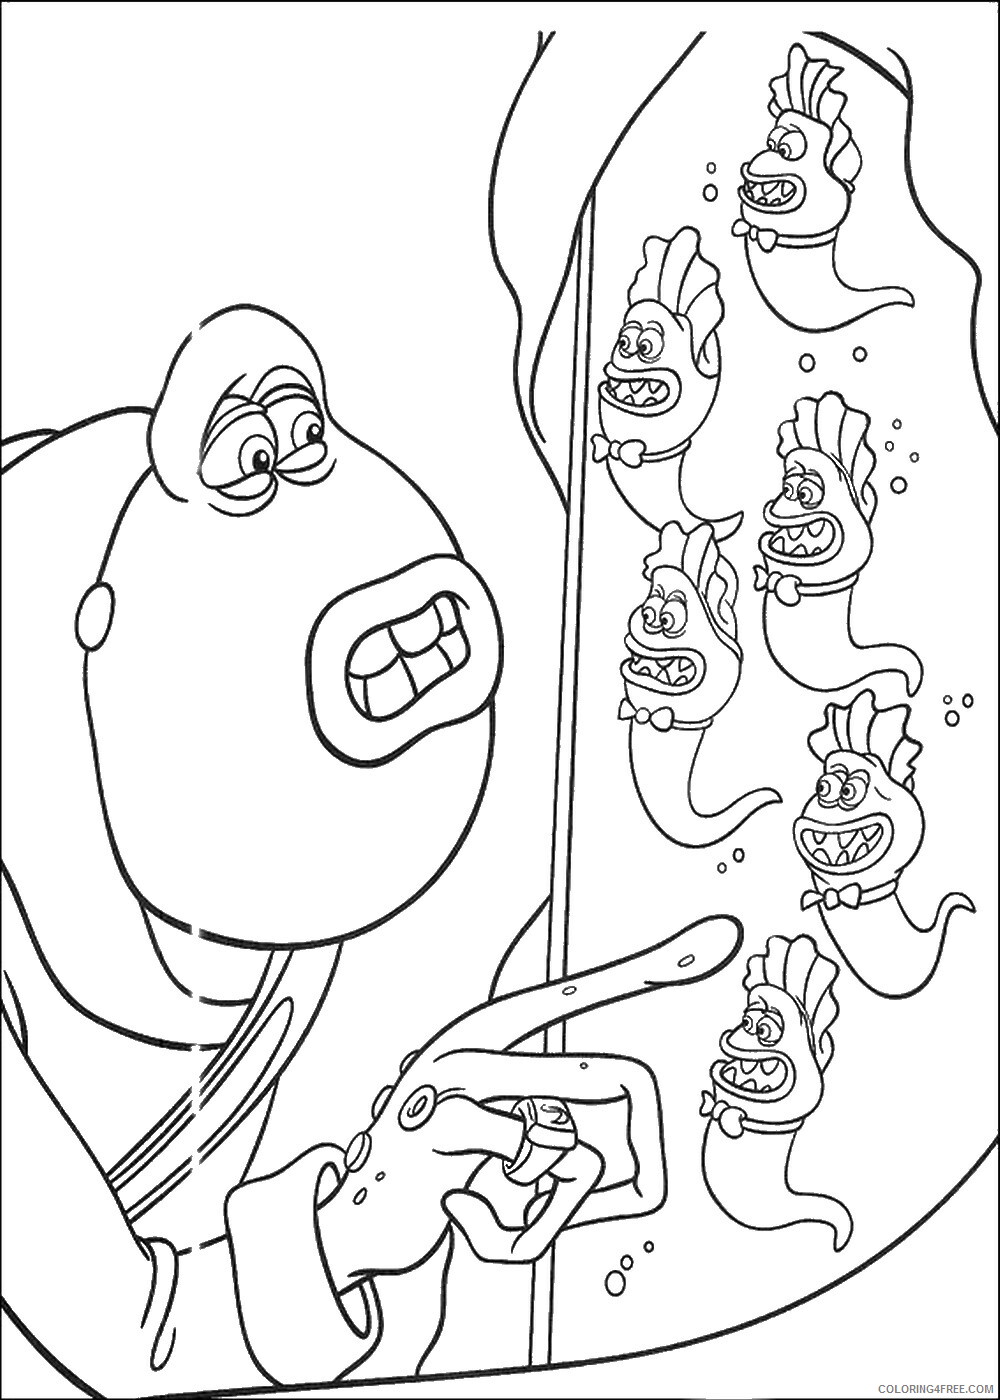 Flushed Away Coloring Pages TV Film flushed_cl_09 Printable 2020 02968 Coloring4free